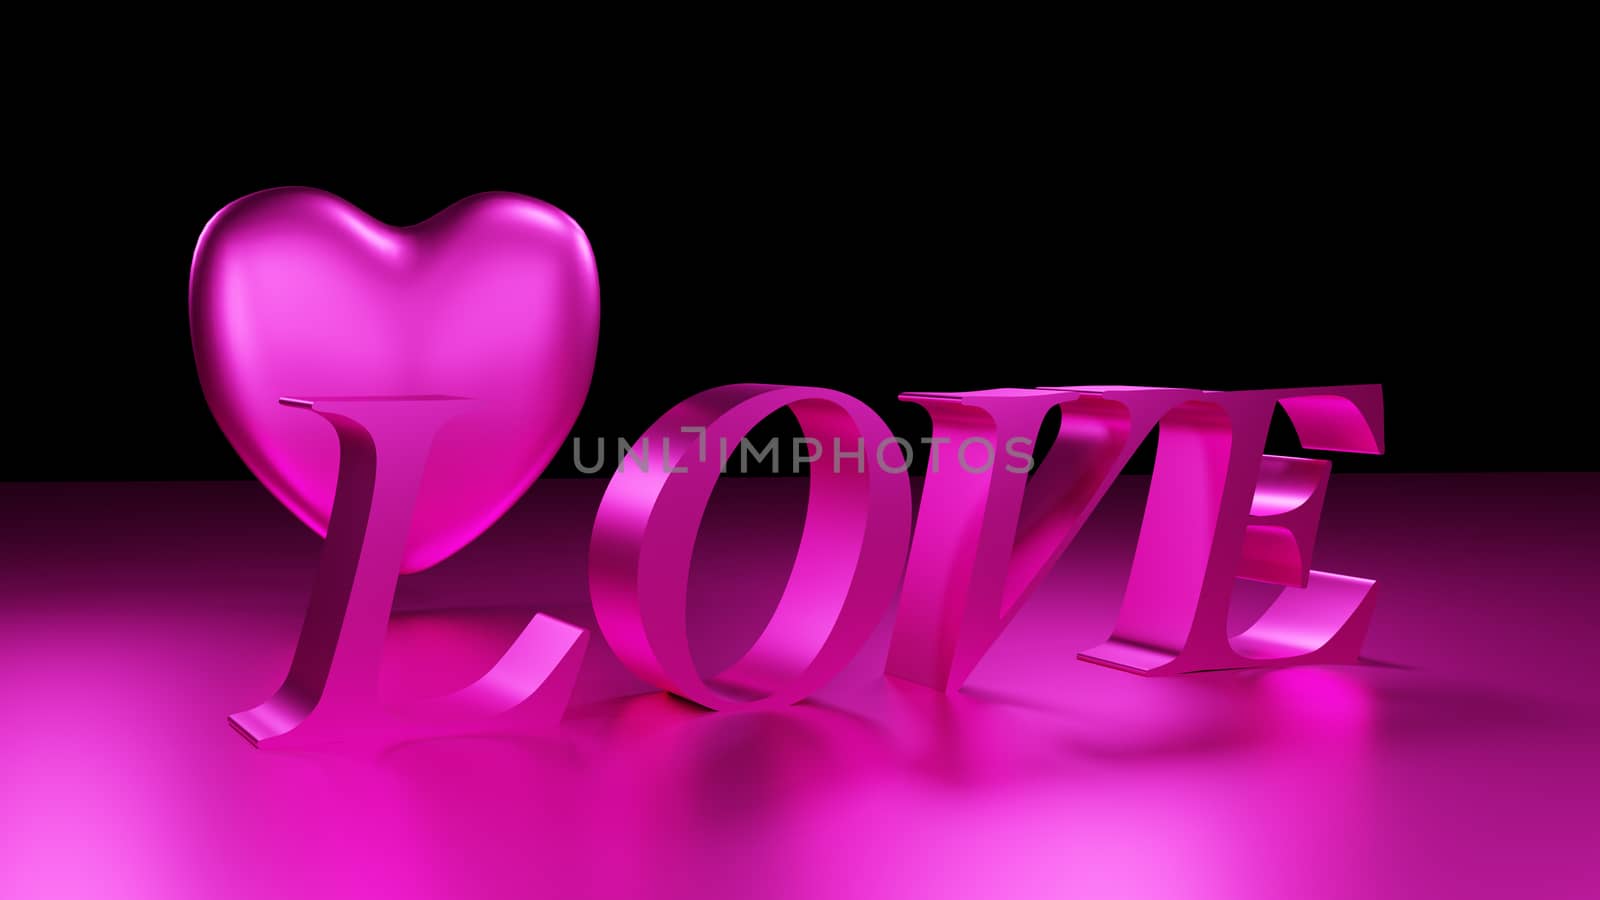 3D rendered text love and a heart by Nawoot